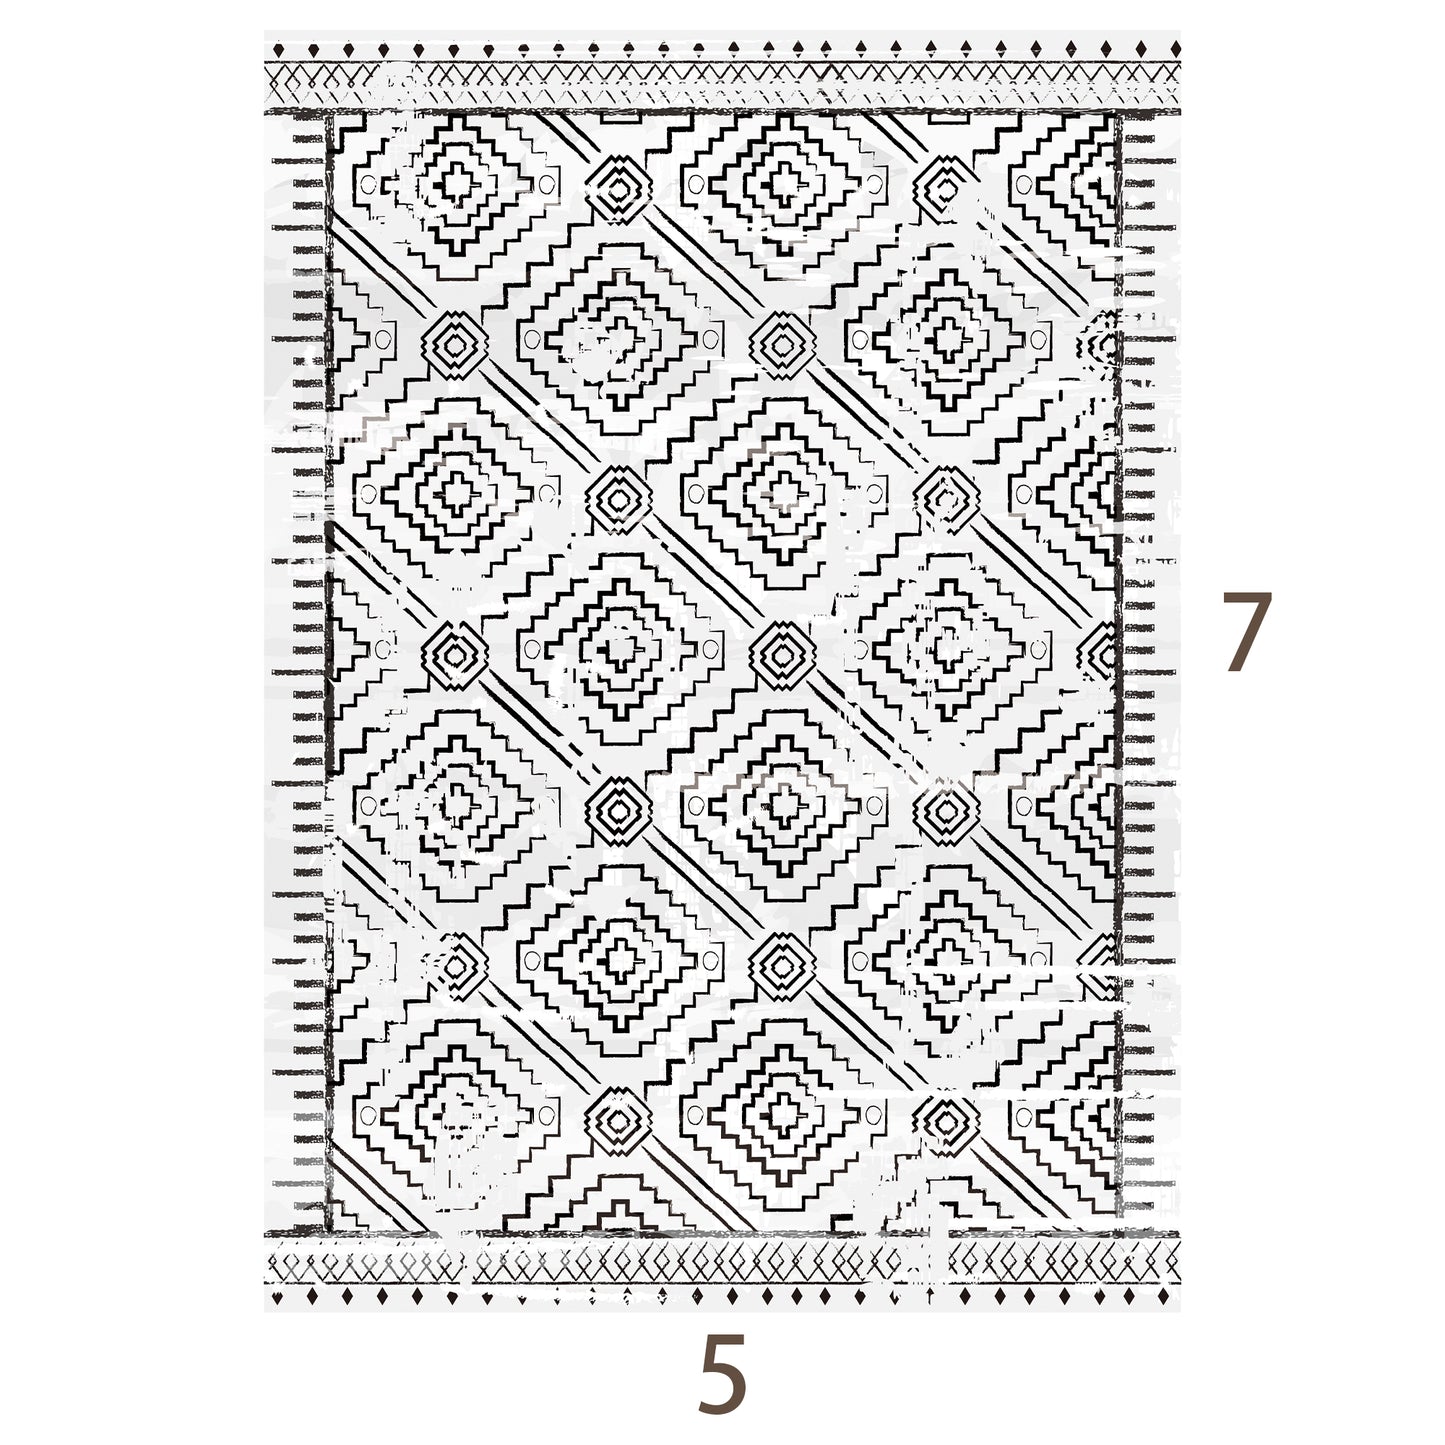 Nezuko 5x7ft Area Rugs for Living Room Washable Rugs Boho Moroccan Area Rug Soft Neutral Geometric Bohemian Carpet Distressed Indoor Rug for Bedroom Dining Room Office Foldable Nonslip Rug